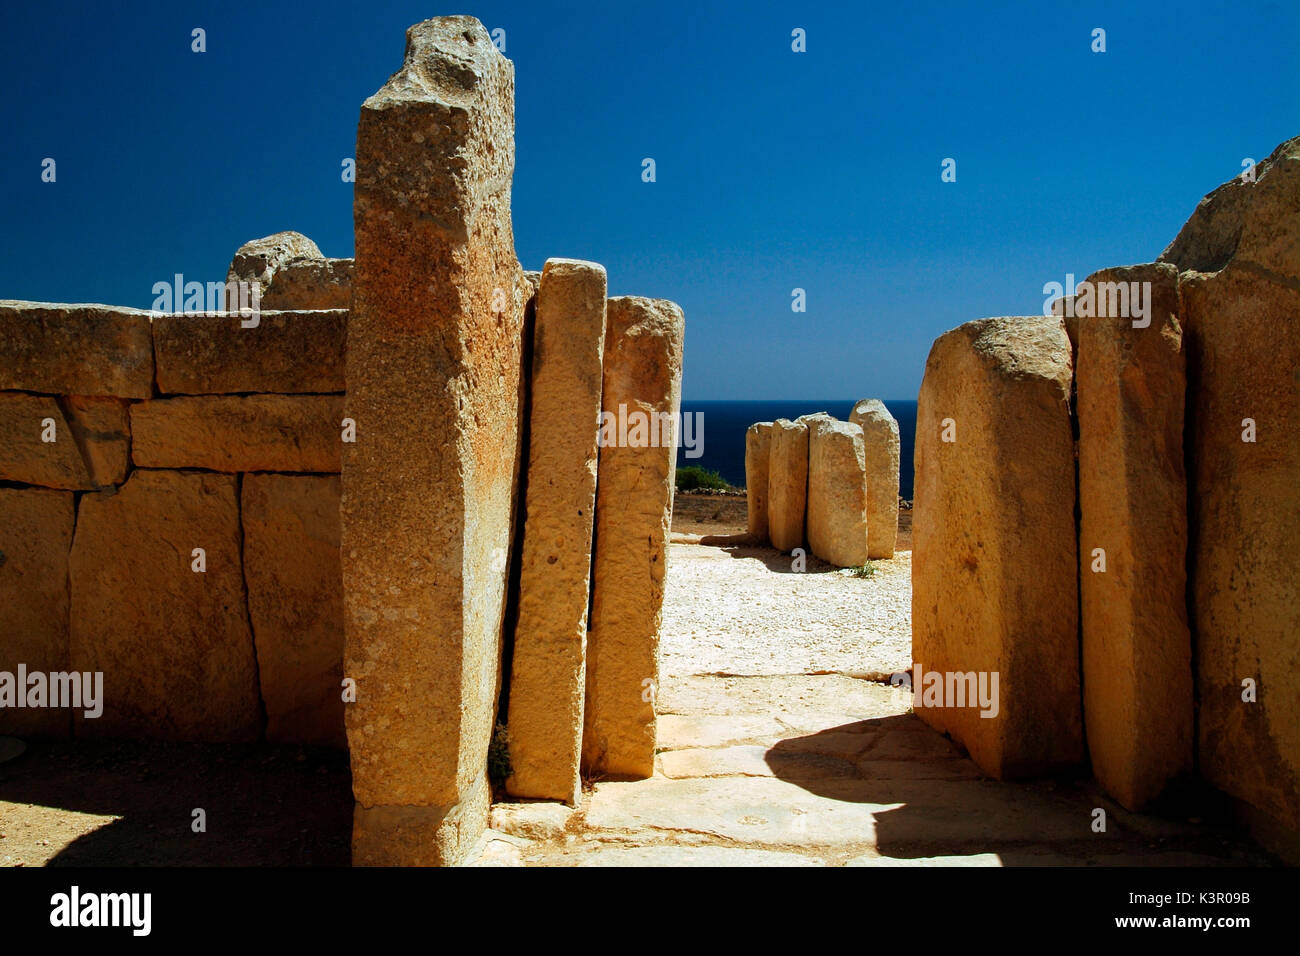 Hagar Qim is a group of megalithic t amongst the most ancient religious sites on Earth, described by the World Heritage Sites committee as unique architectural masterpieces Malta Europe Stock Photo